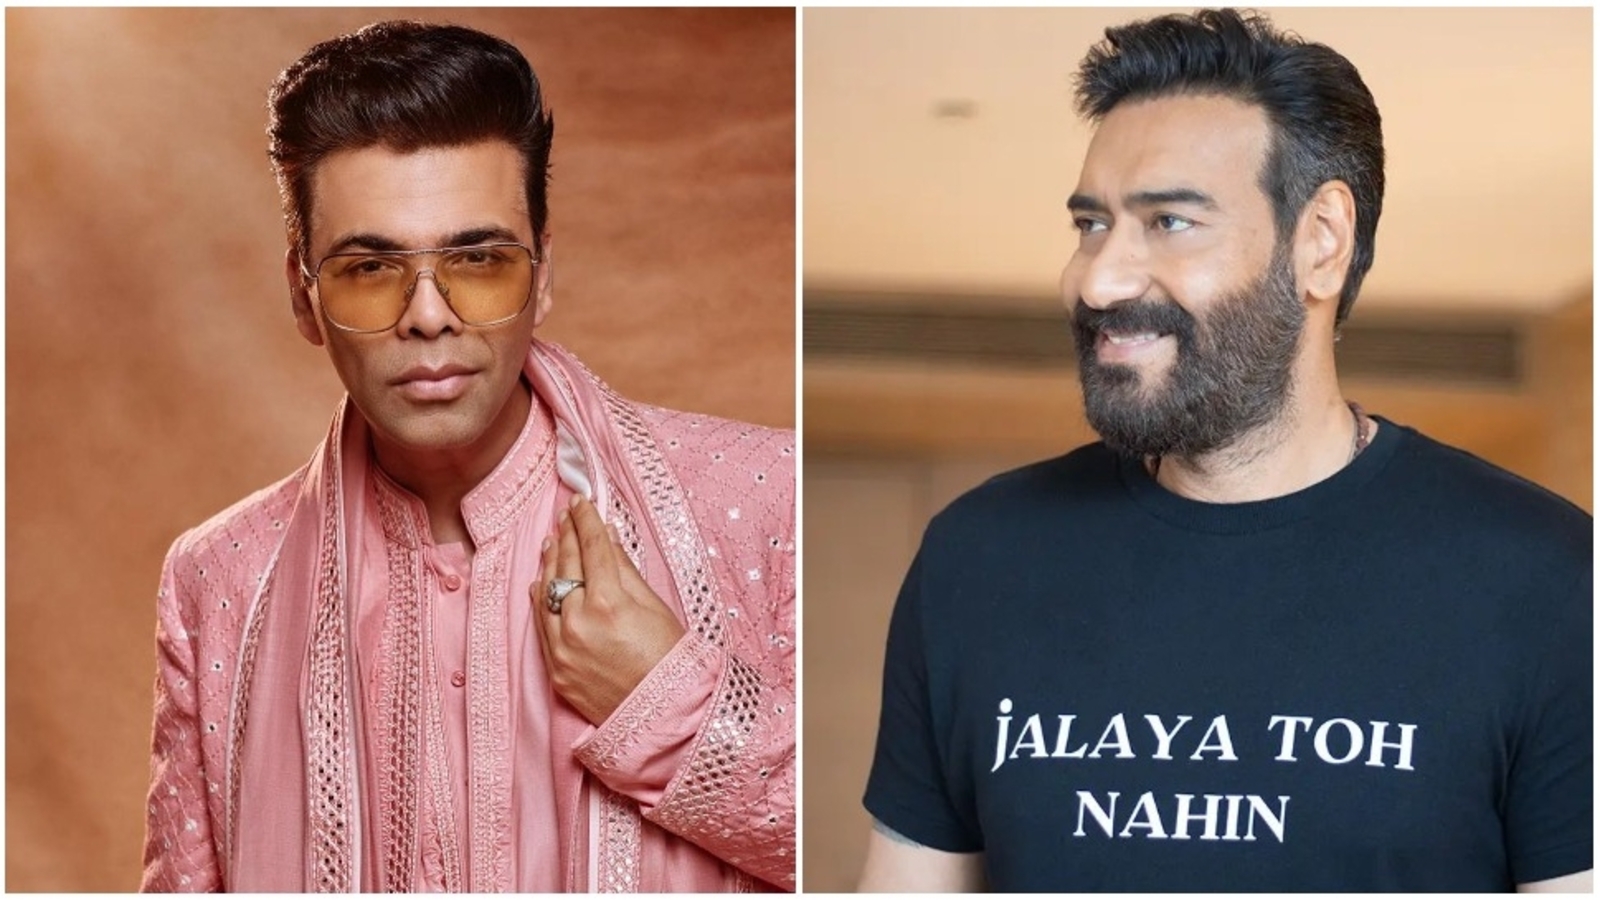 Years after their tiff, Karan Johar sends wishes to Ajay Devgn for Runway 34, actors wants him to watch the ‘first copy’